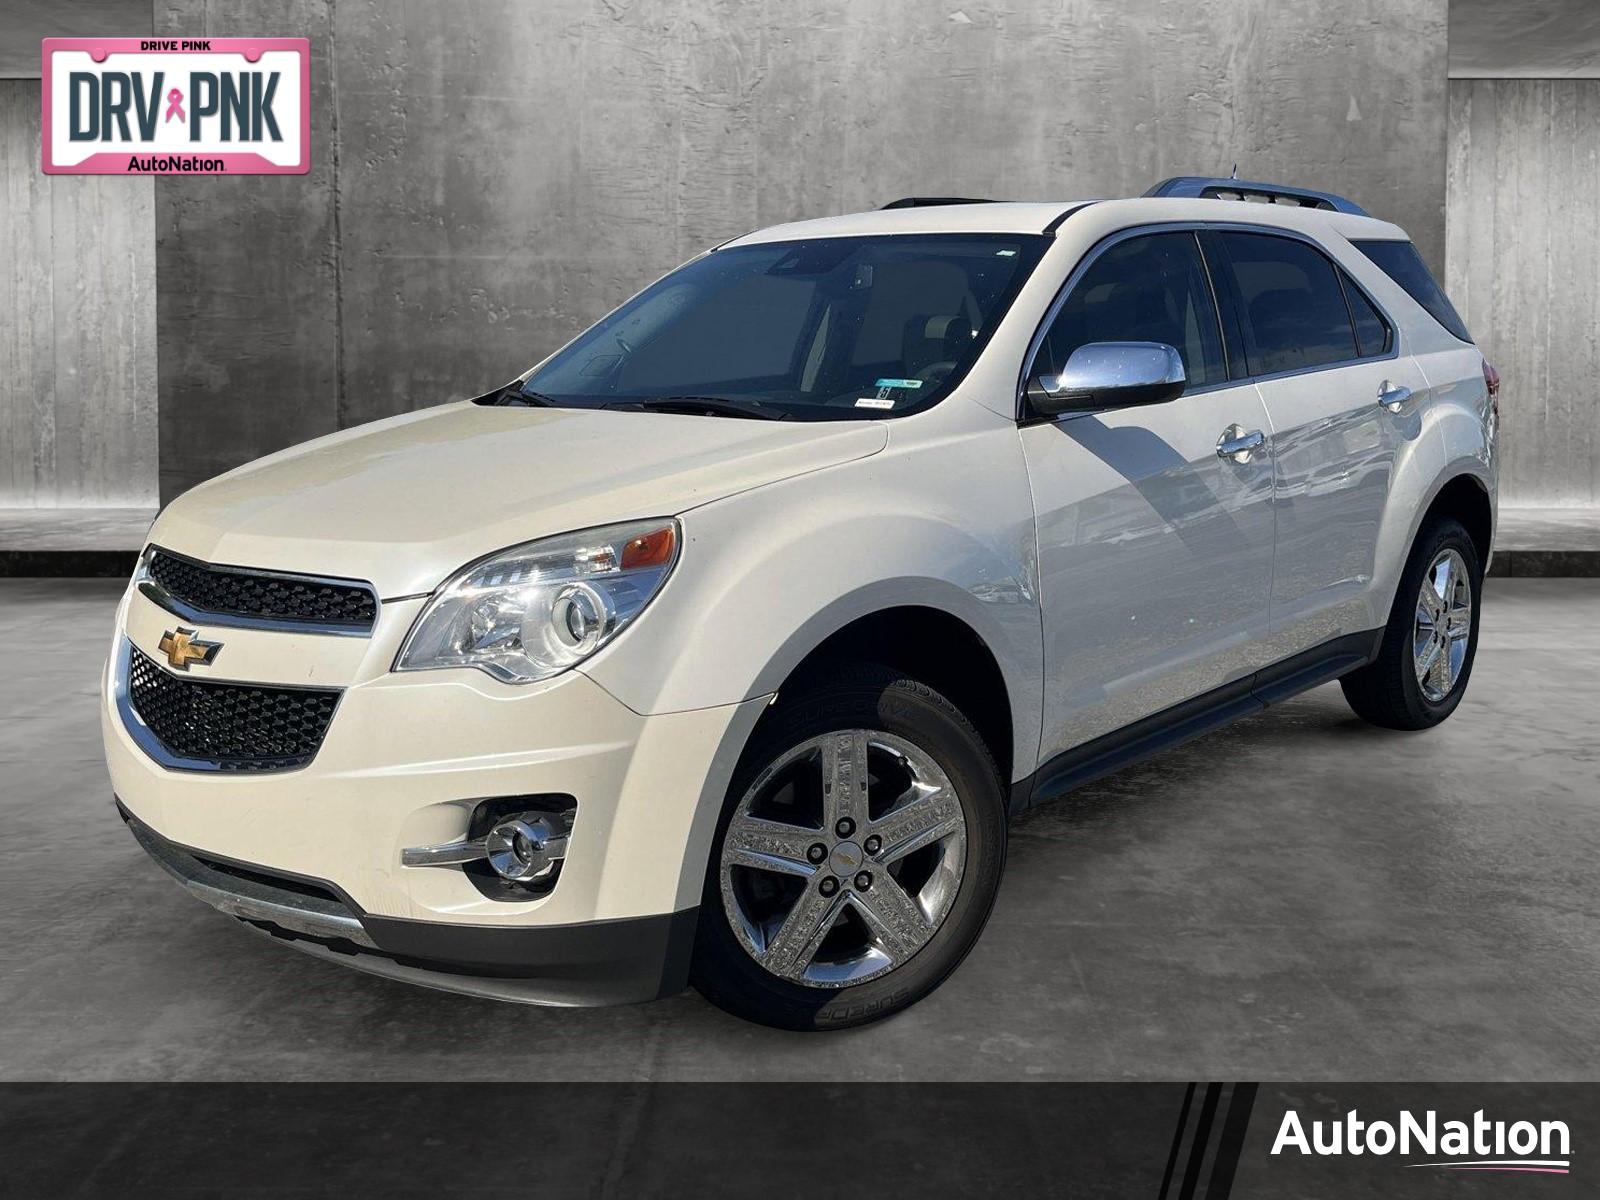 2015 Chevrolet Equinox Vehicle Photo in Clearwater, FL 33764